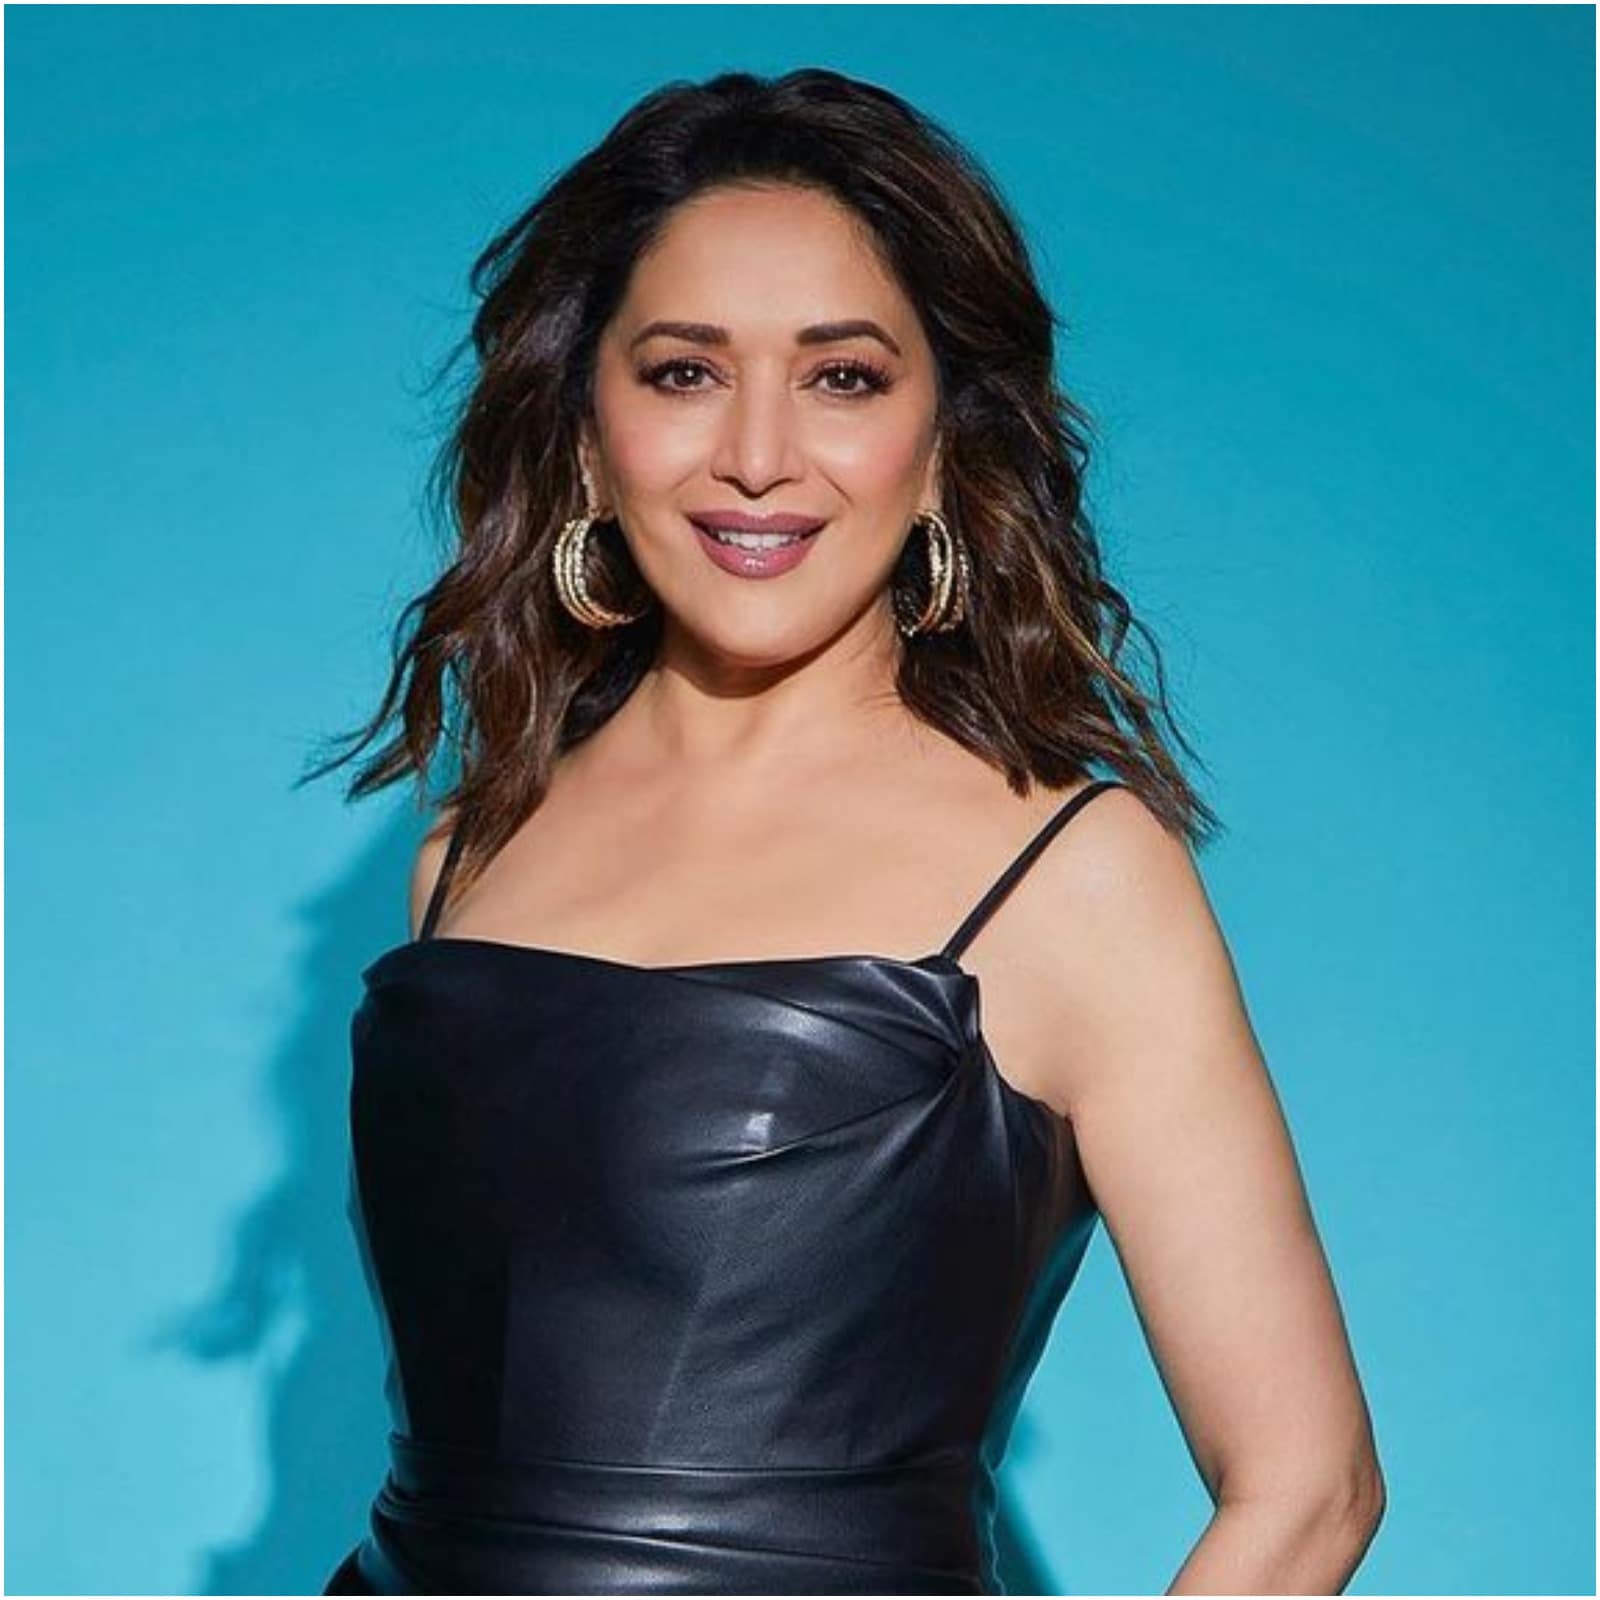 Madhuri Dixit Xxx - Madhuri Dixit Reveals People Told Her She 'Doesn't Look Like A Heroine' -  News18